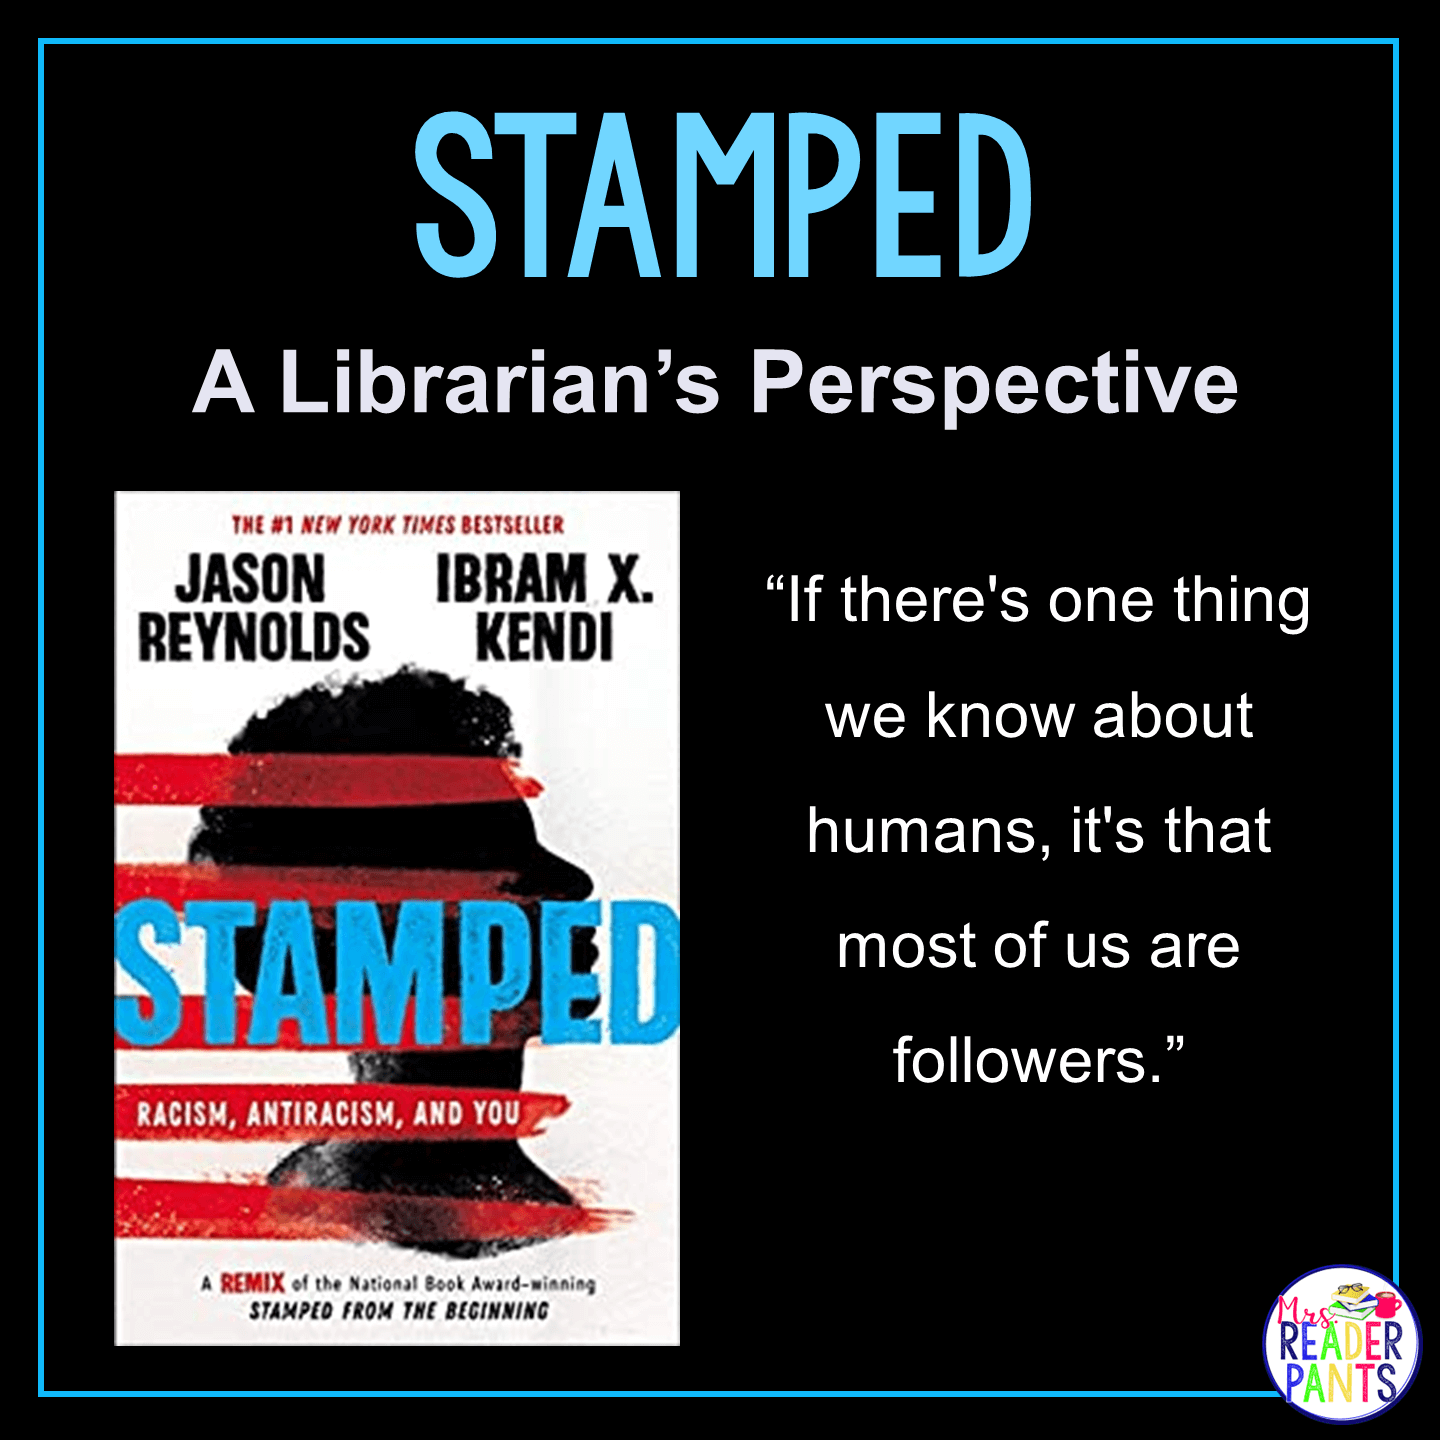 This is a Librarian's Perspective Review of Stamped by Jason Reynolds and Ibram X. Kendi.